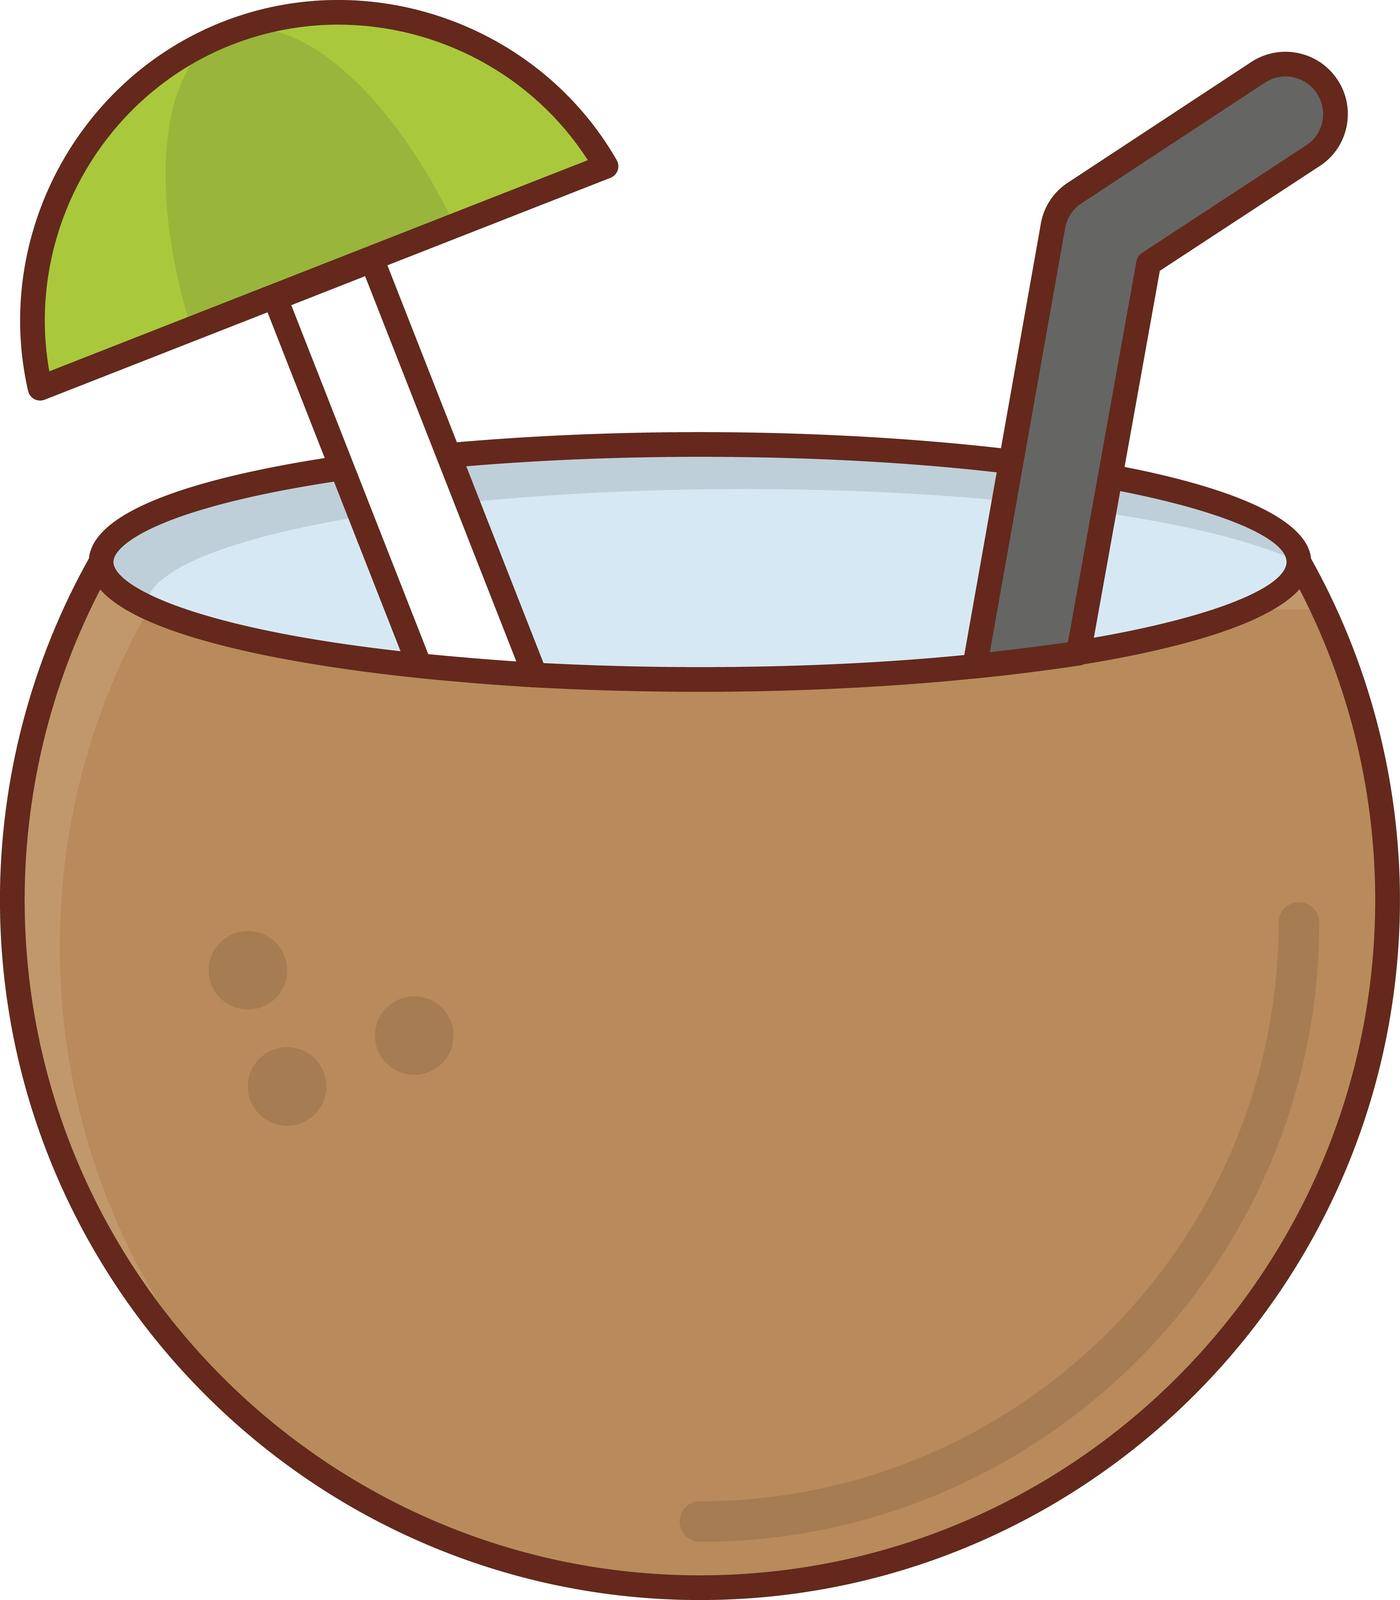 coconut by FlaticonsDesign